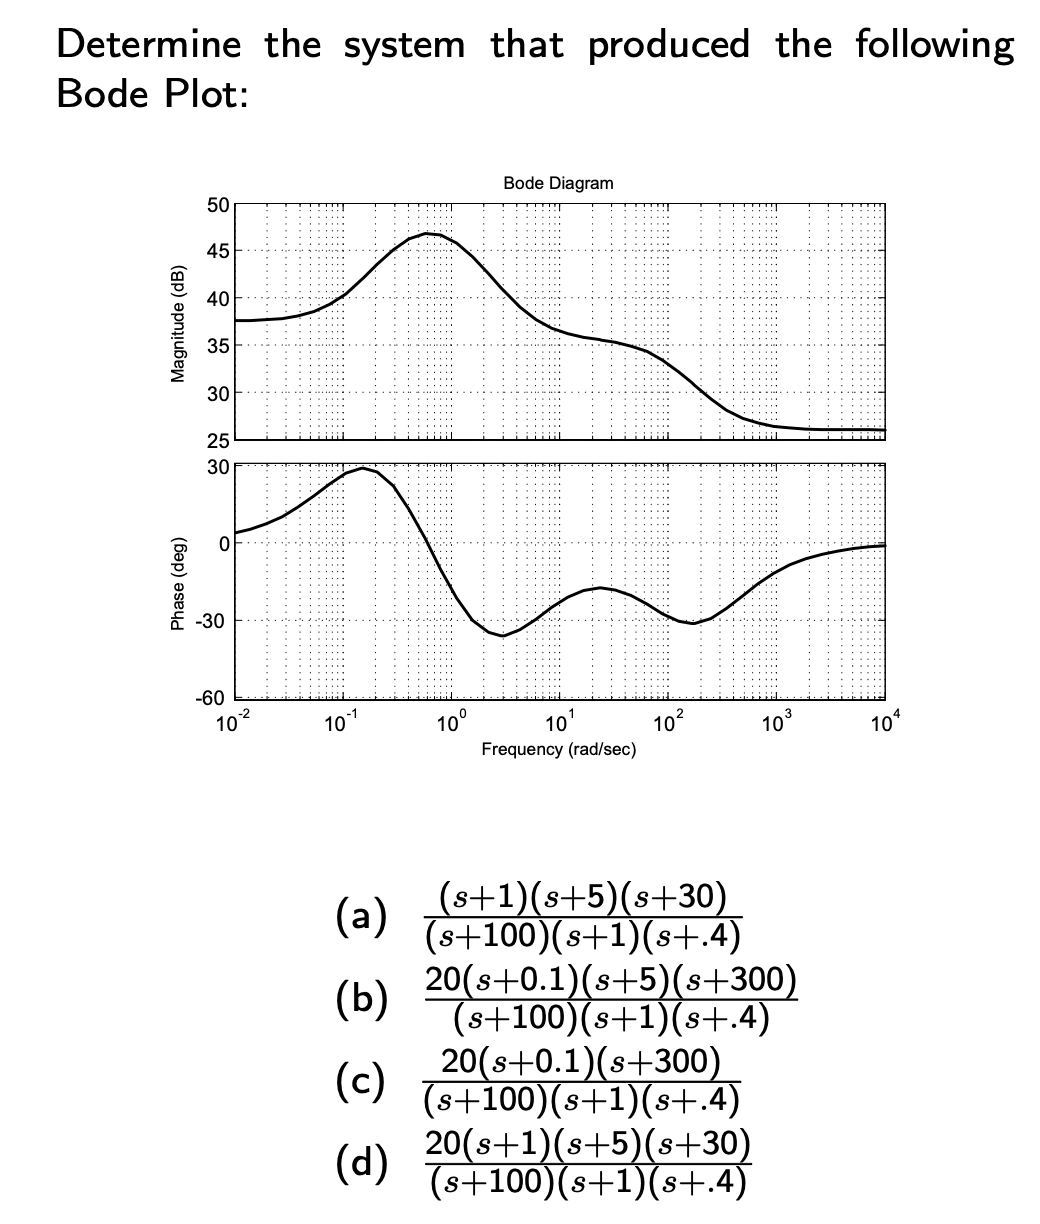 Determine the system that produced the following
Bode Plot:
Magnitude (dB)
Phase (deg)
50
45
40
35
30
25
30
O
-30
-60
10²
-2
10
(a)
(b)
(c)
(d)
10⁰
Bode Diagram
10
Frequency (rad/sec)
10²
10³
(s+1)(s+5)(s+30)
(s+100)(s+1)(s+.4)
20(s+0.1)(s+5)(s+300)
(s+100)(s+1)(s+.4)
20(s+0.1)(s+300)
(s+100) (s+1)(s+.4)
20(s+1)(s+5)(s+30)
(s+100) (s+1)(s+.4)
힘
104